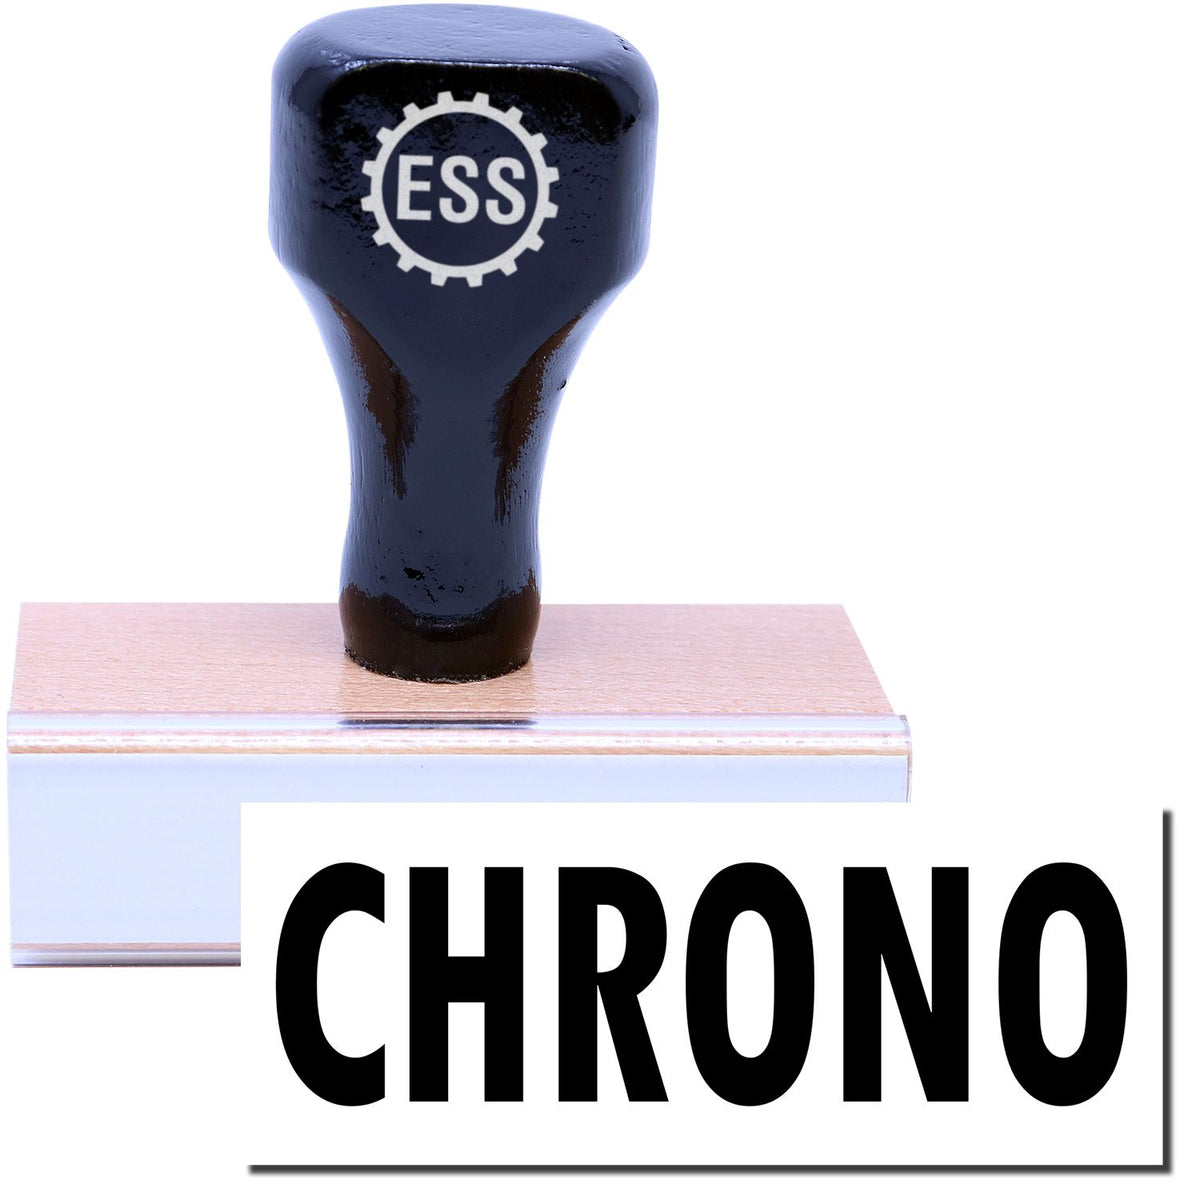 A stock office rubber stamp with a stamped image showing how the text &quot;CHRONO&quot; is displayed after stamping.